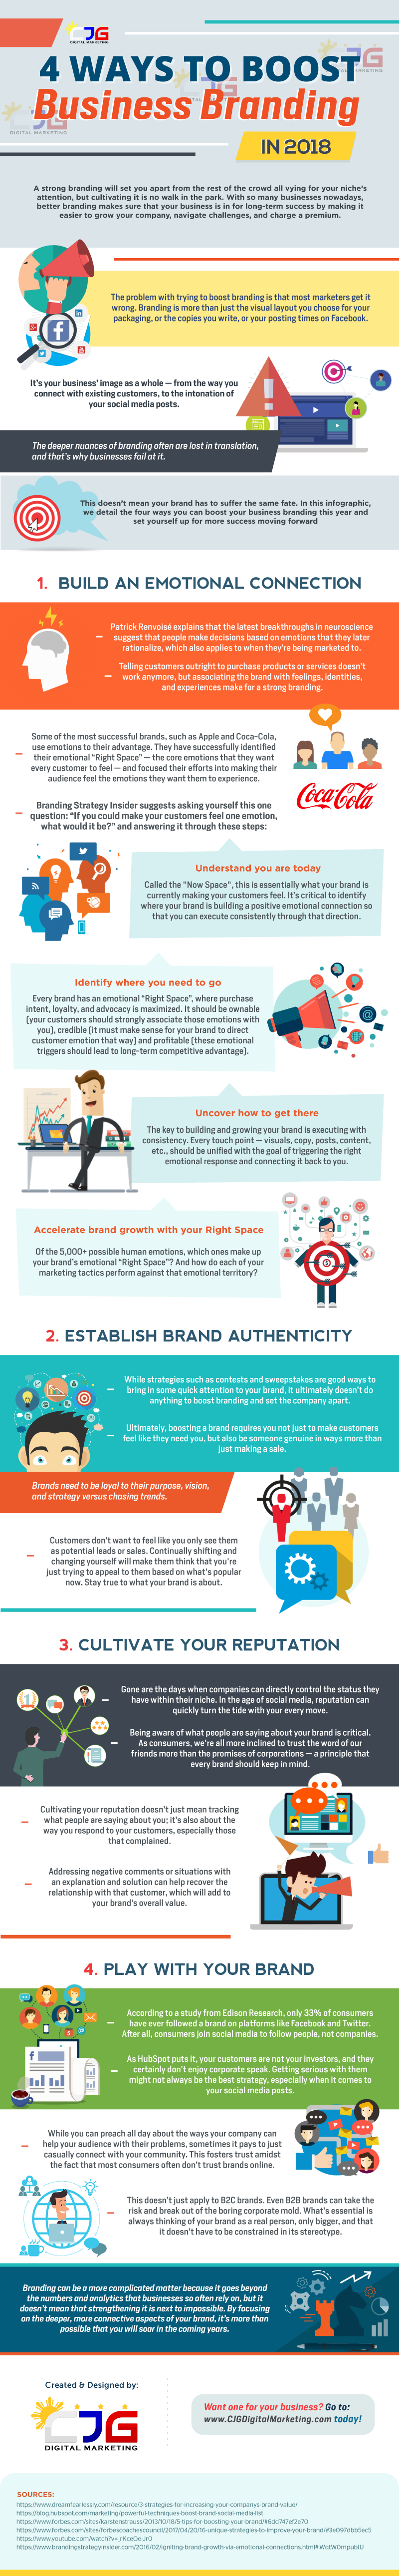 4 Ways to Boost Business Branding (Infographic)